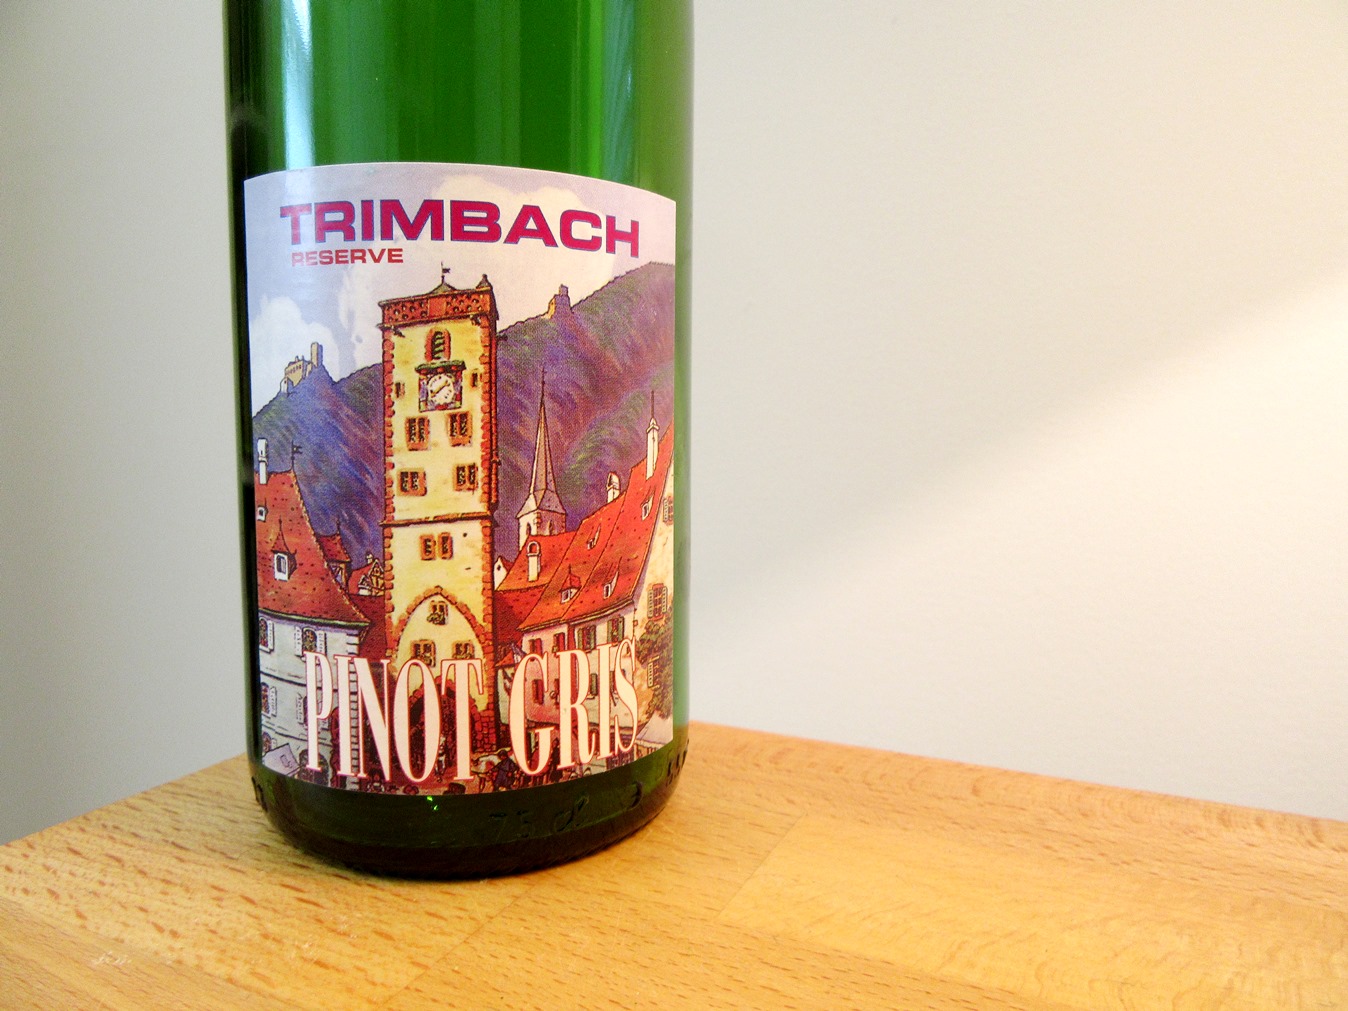 F.E. Trimbach, Reserve Pinot Gris 2012, Alsace, France, Wine Casual